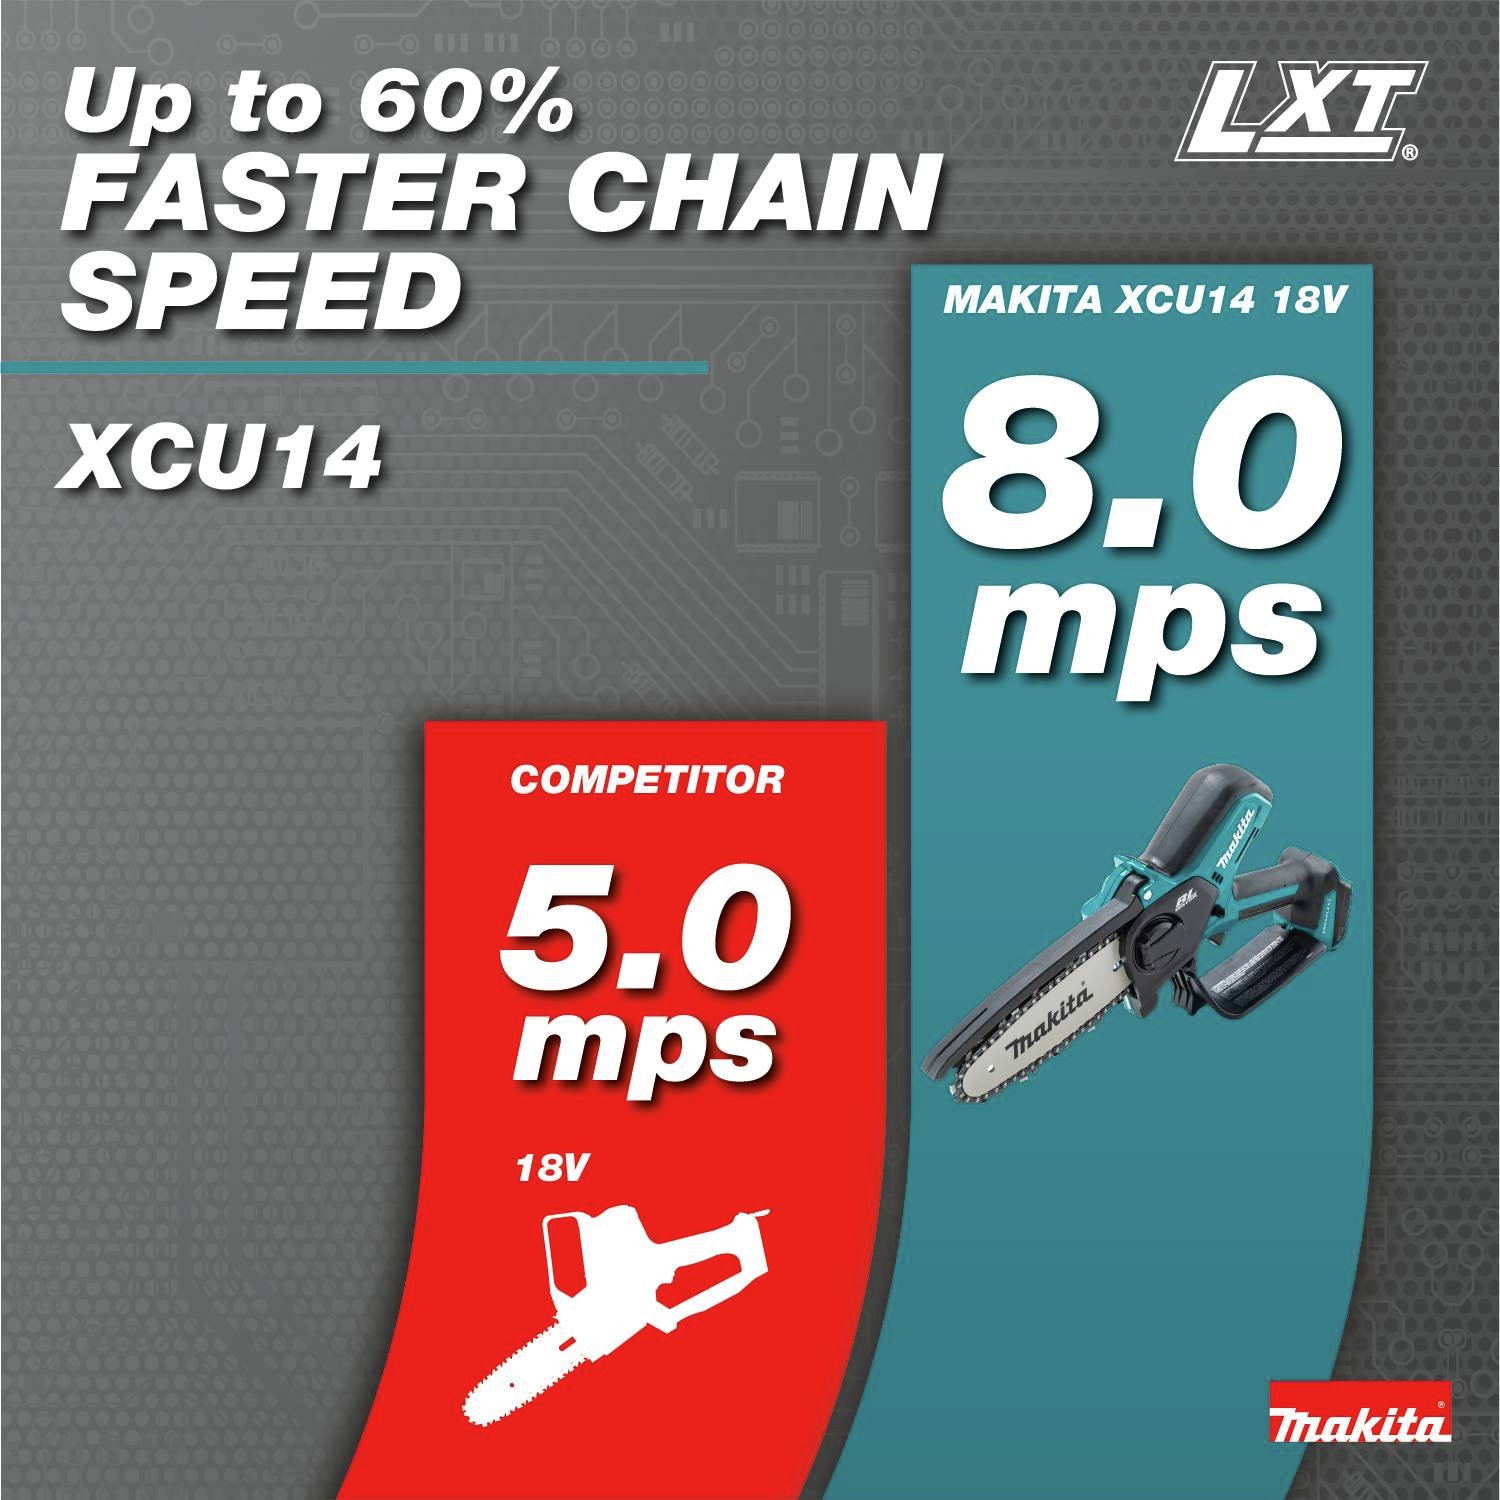 Up to 60% faster chain speed: Competitor 5 mps vs Makita 8 mps